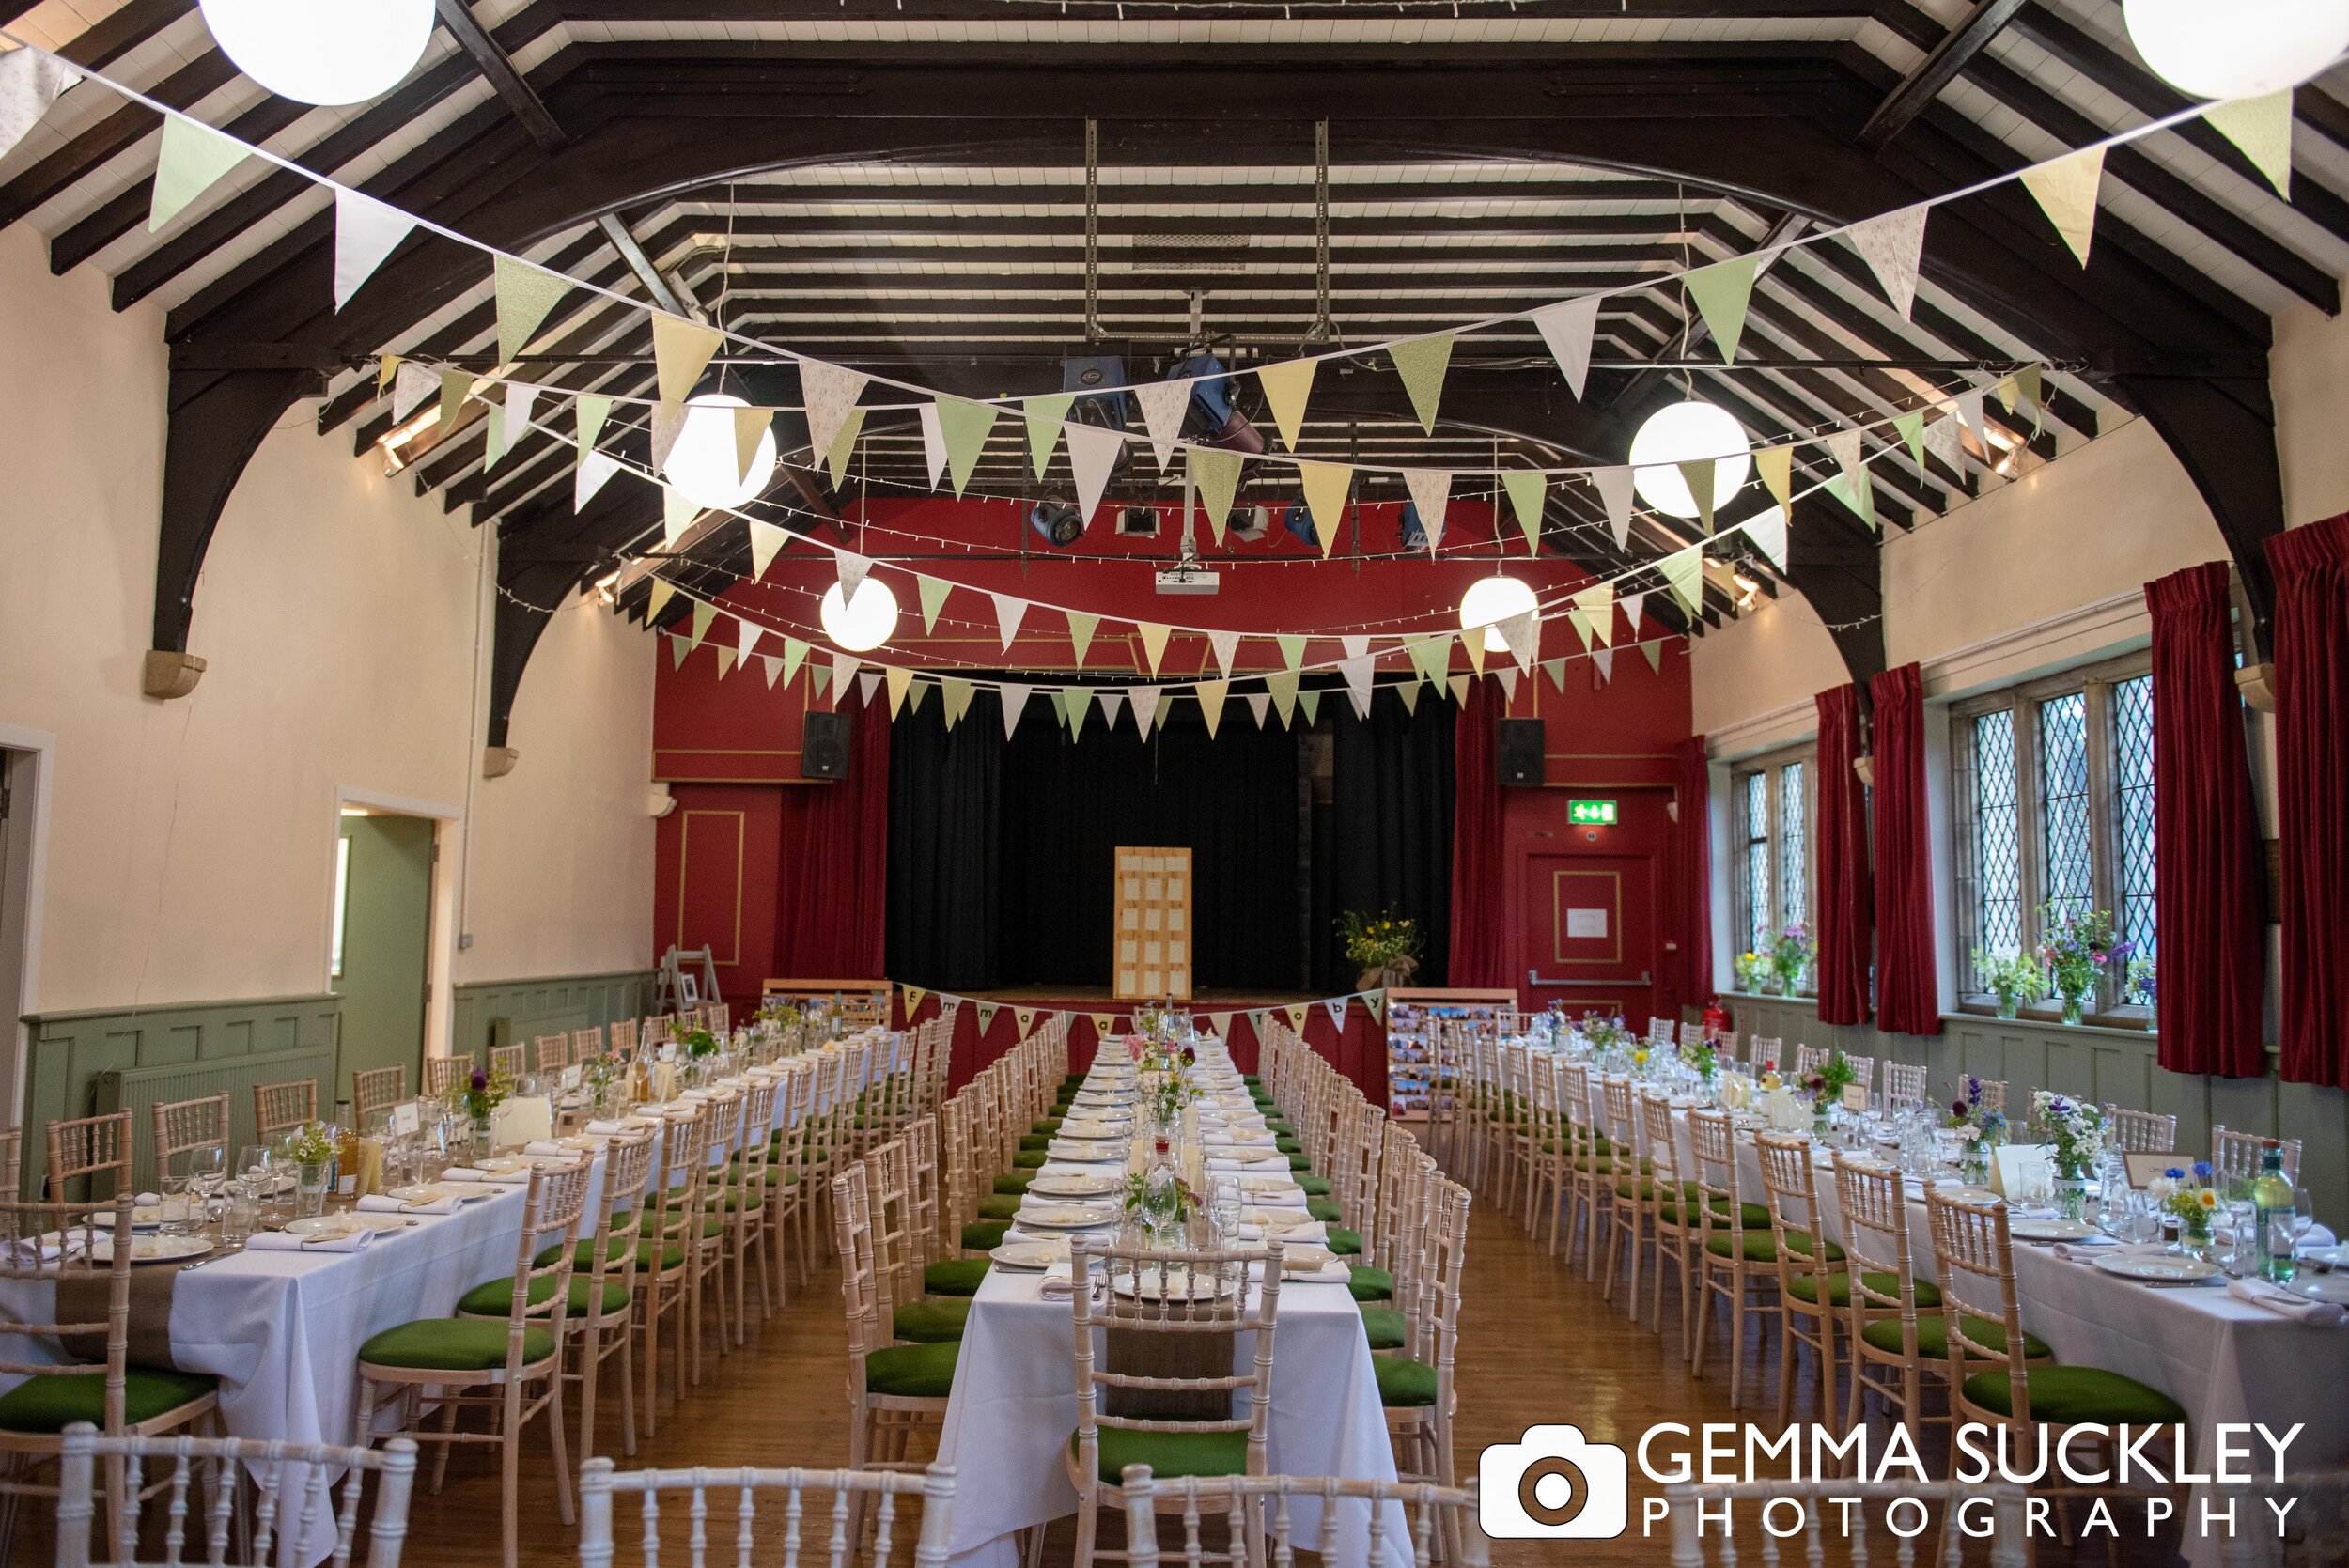 burnsall village hall decorated for a wedding